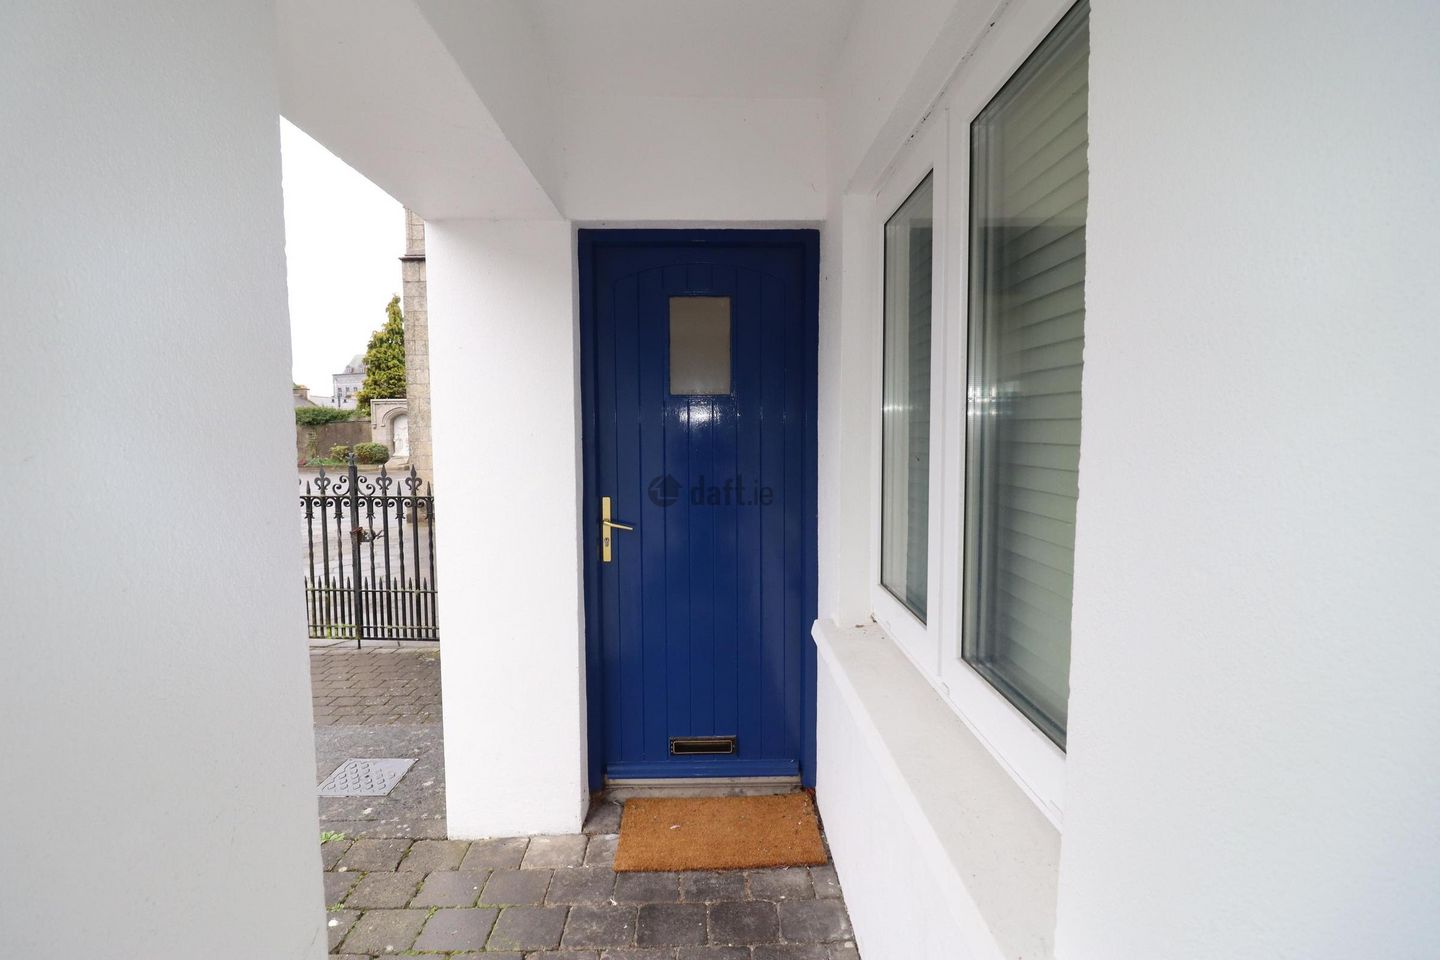 8C Presentation Place, Tullow Street, Carlow Town, Co. Carlow